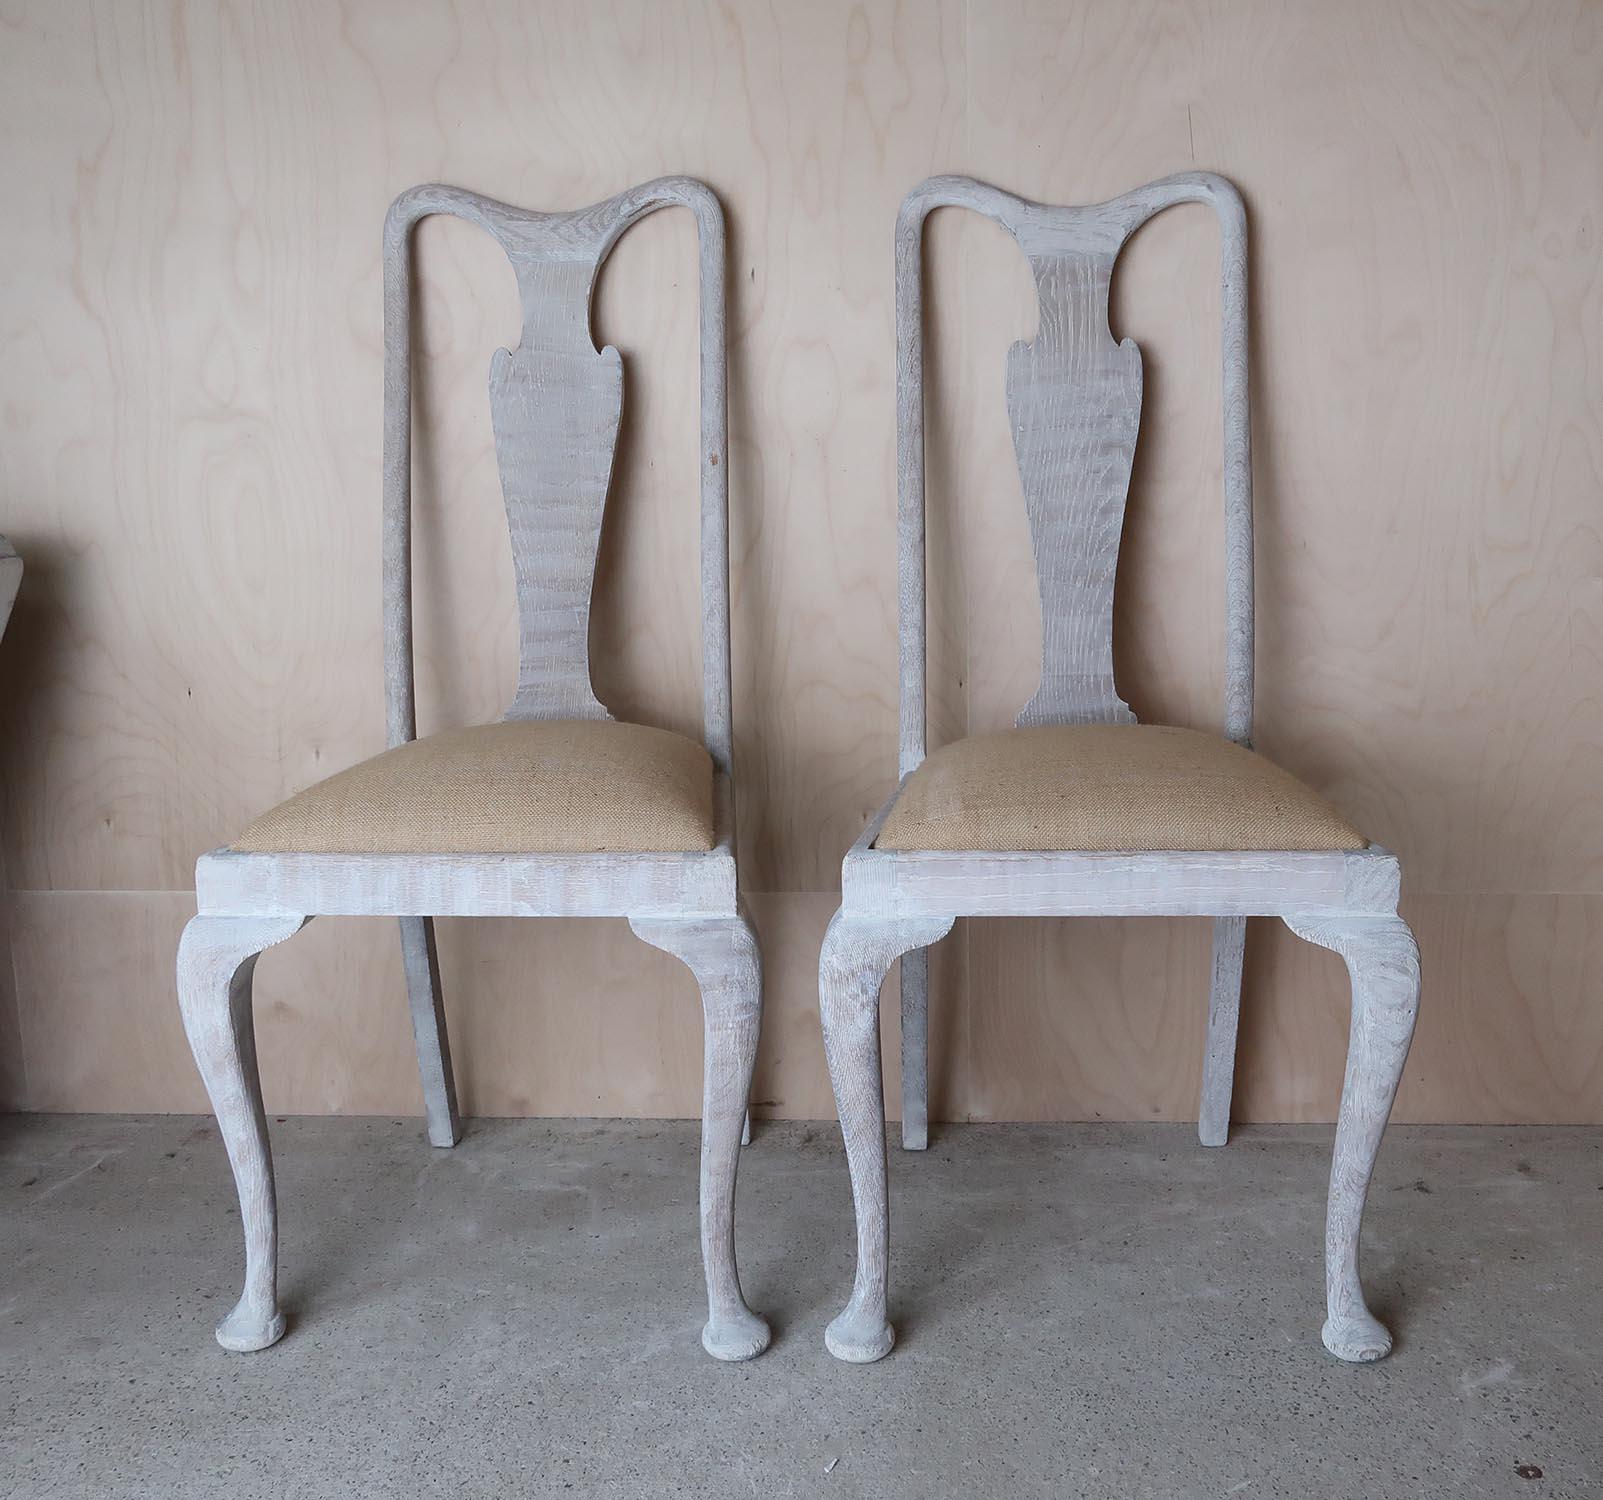 A pair of English limed oak chairs. 

Typical Gustavian style, the chairs have delightful urn back splats, unadorned cabriole or Queen Anne legs and the elegantly understated shaped top-rails.

They have been recently limed to enhance the